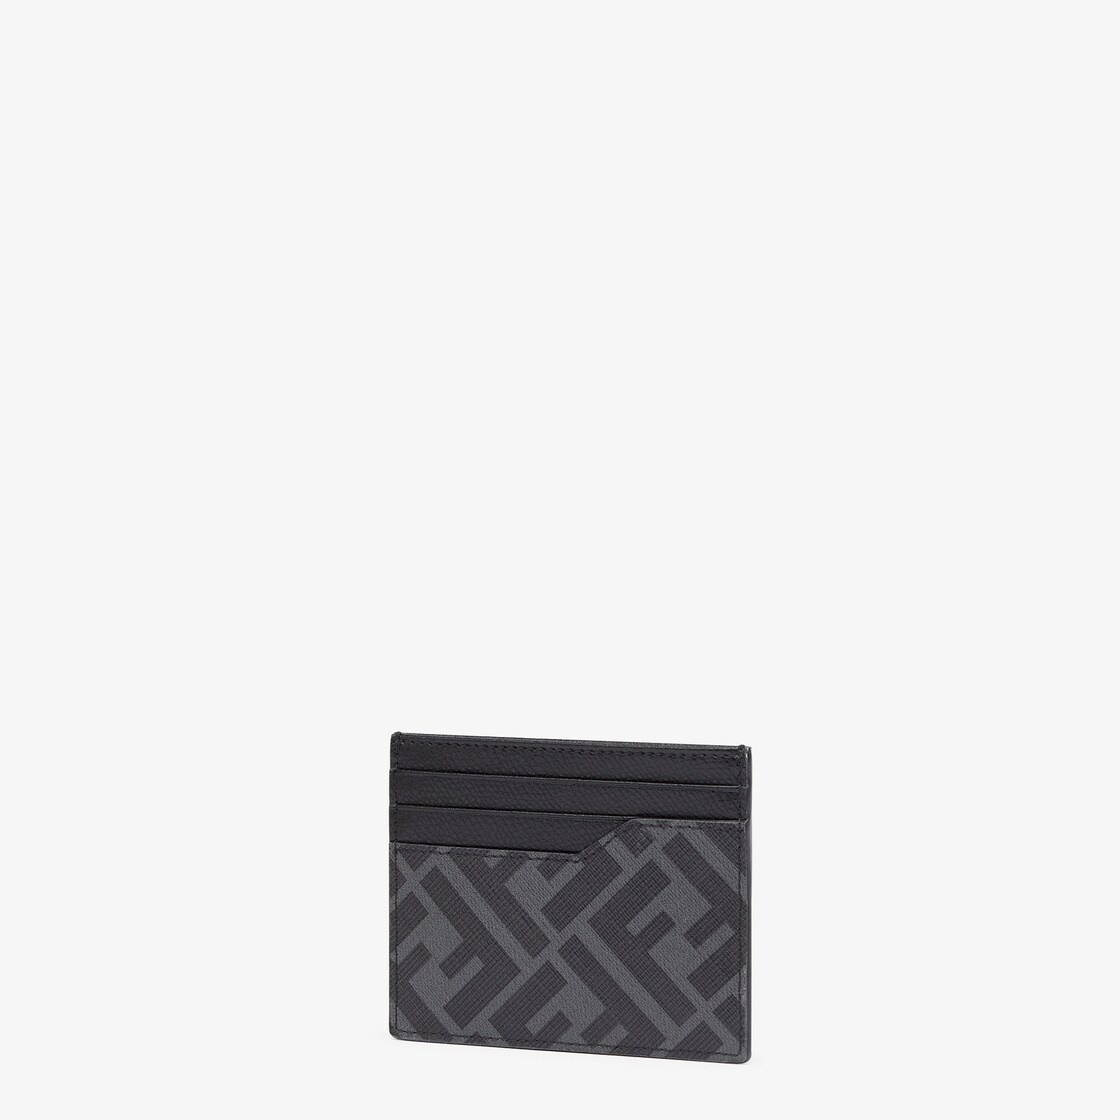 Card holder with central flat pocket and 6 slots. Made of textured fabric with a gray and black FF m - 2